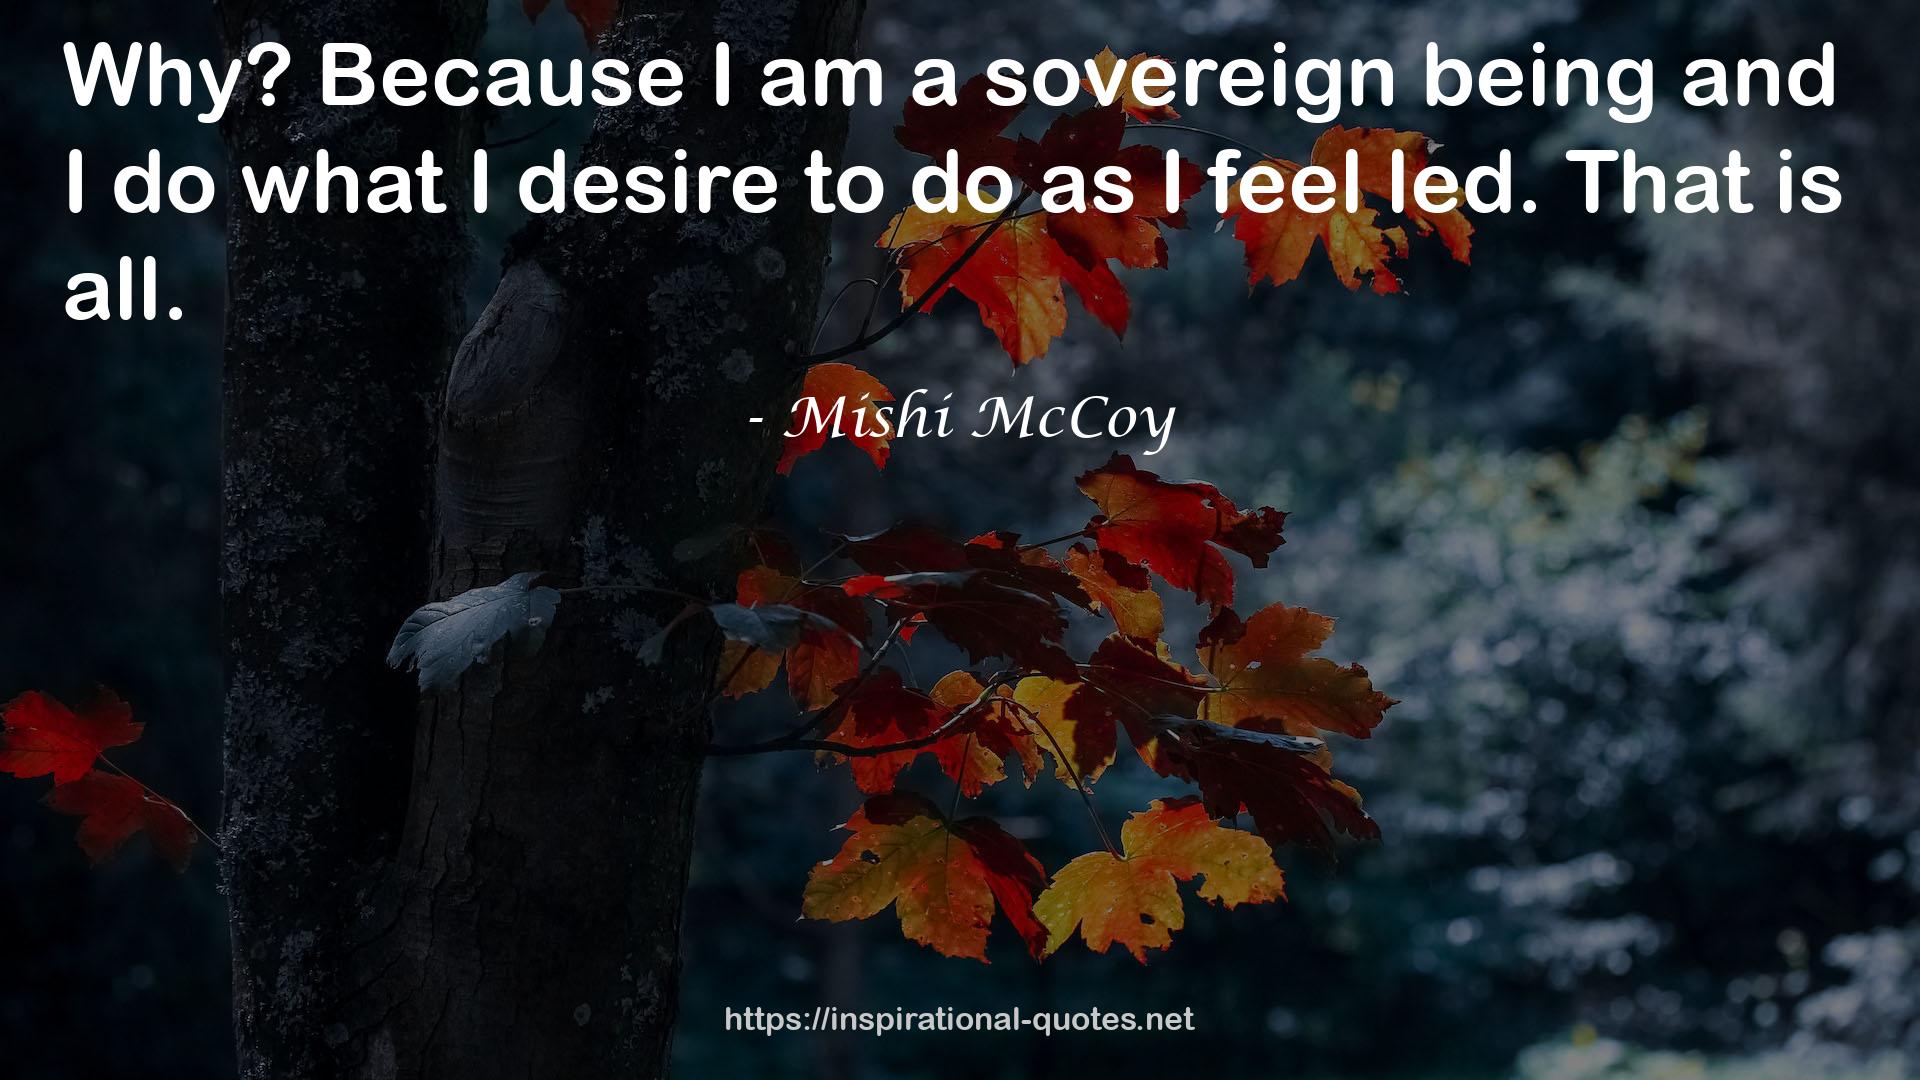 a sovereign being  QUOTES